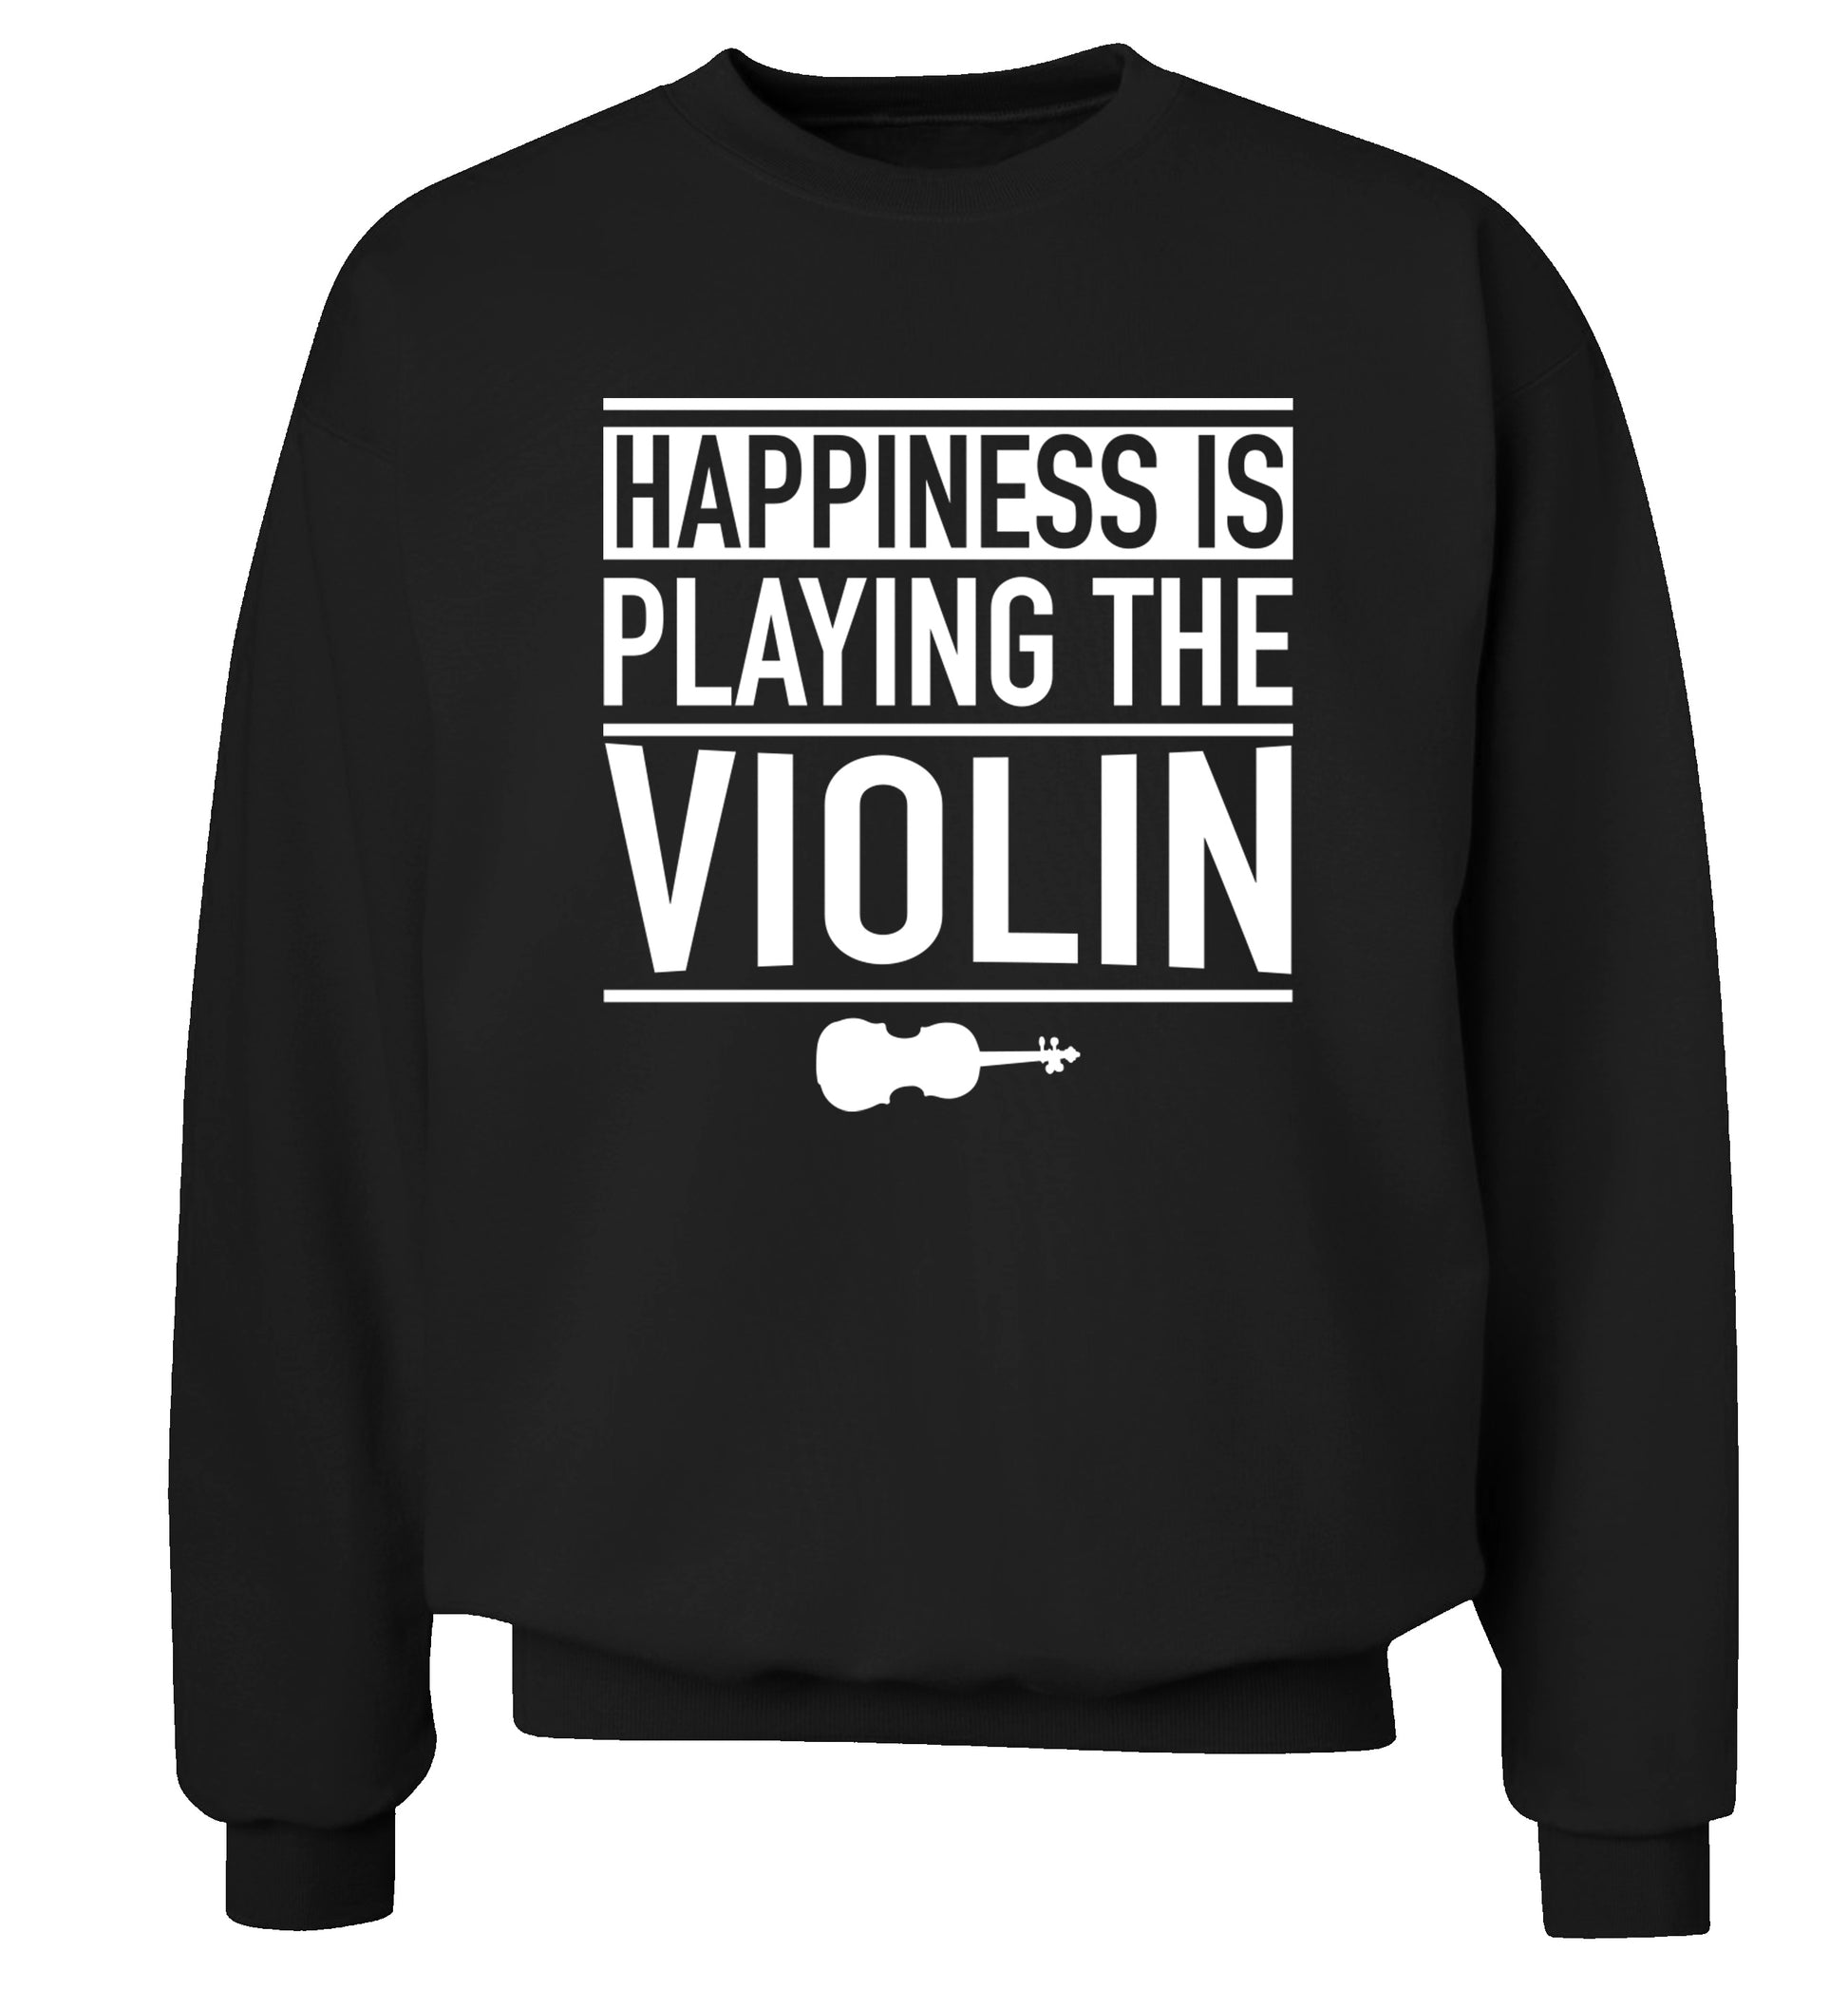 Happiness is playing the violin Adult's unisex black Sweater 2XL